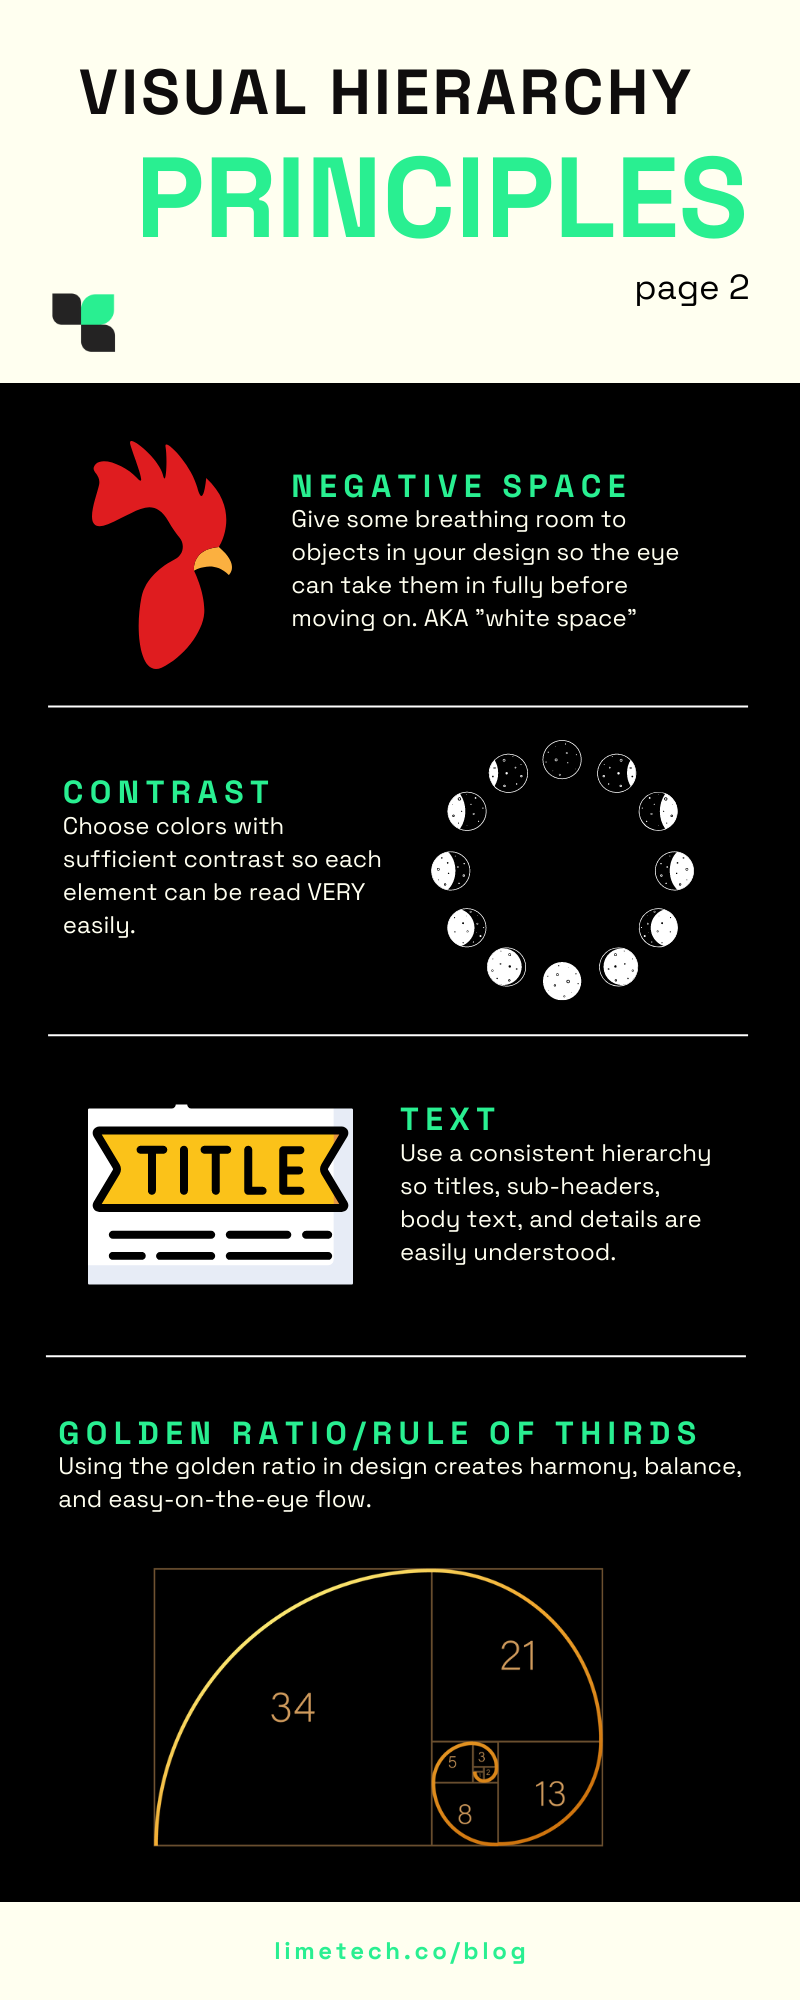 Visual Hierarchy Principles infographic by Addie Kugler-Lunt for LimeTech page 2 of 2